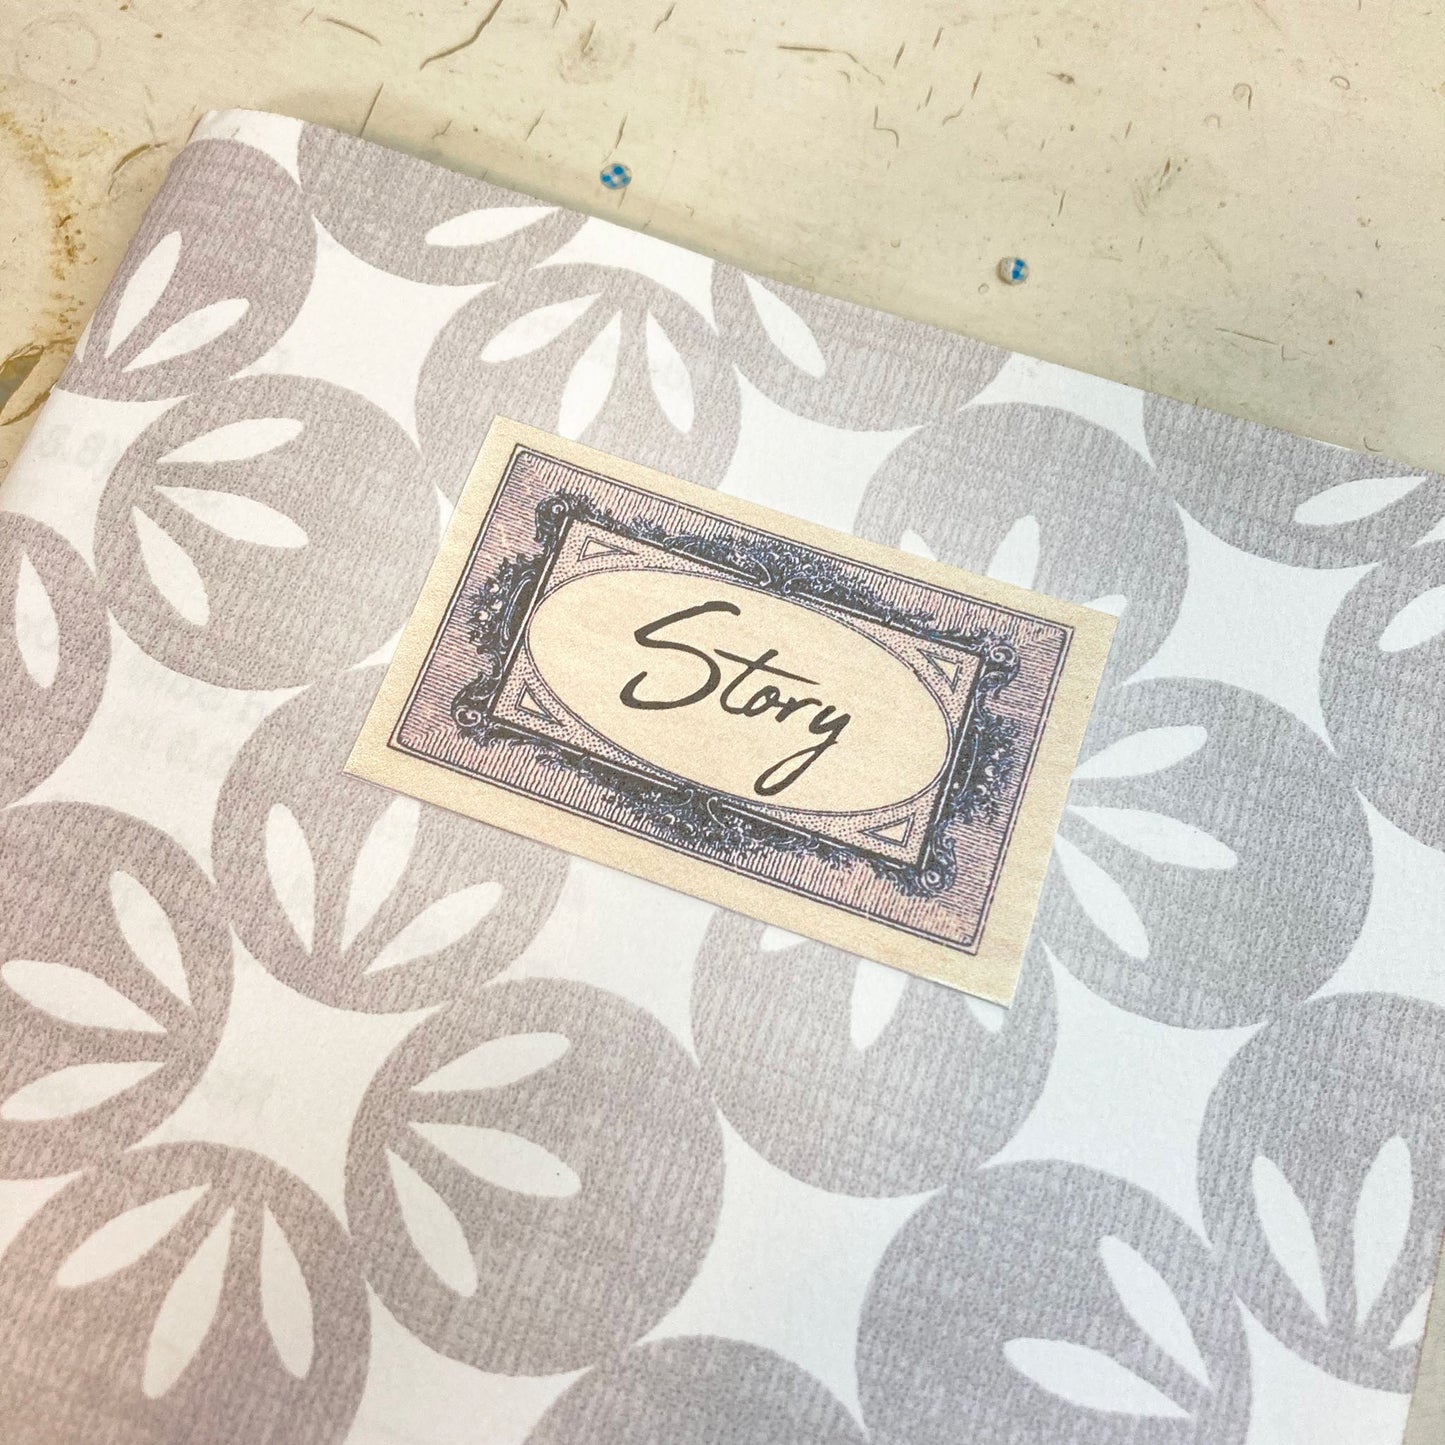 Soft Cover Writing Journal, Blank Newsprint Pages, Wallpaper Cover, Fits in your Purse